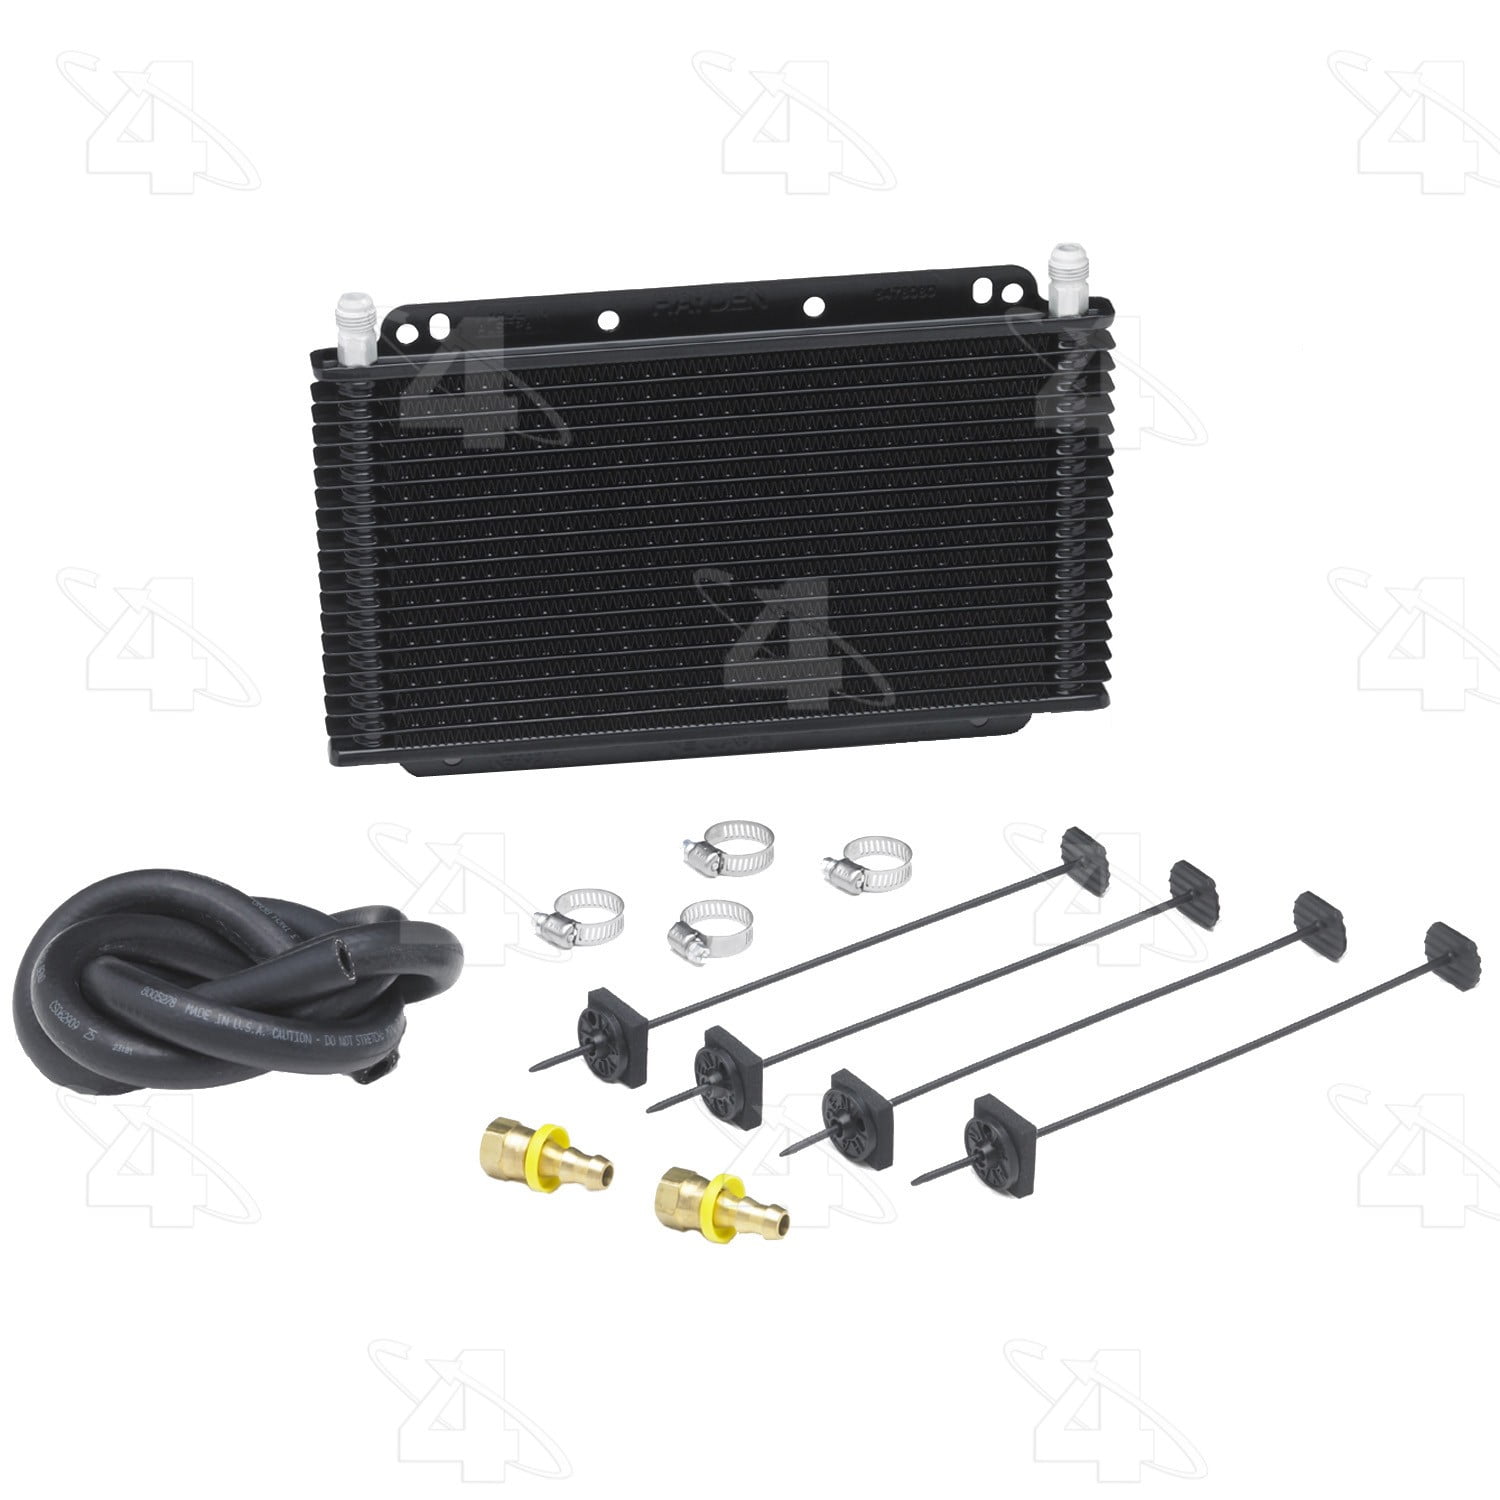 Hayden Automatic Transmission Oil Cooler for 1999-2015 Chevrolet Silverado xy